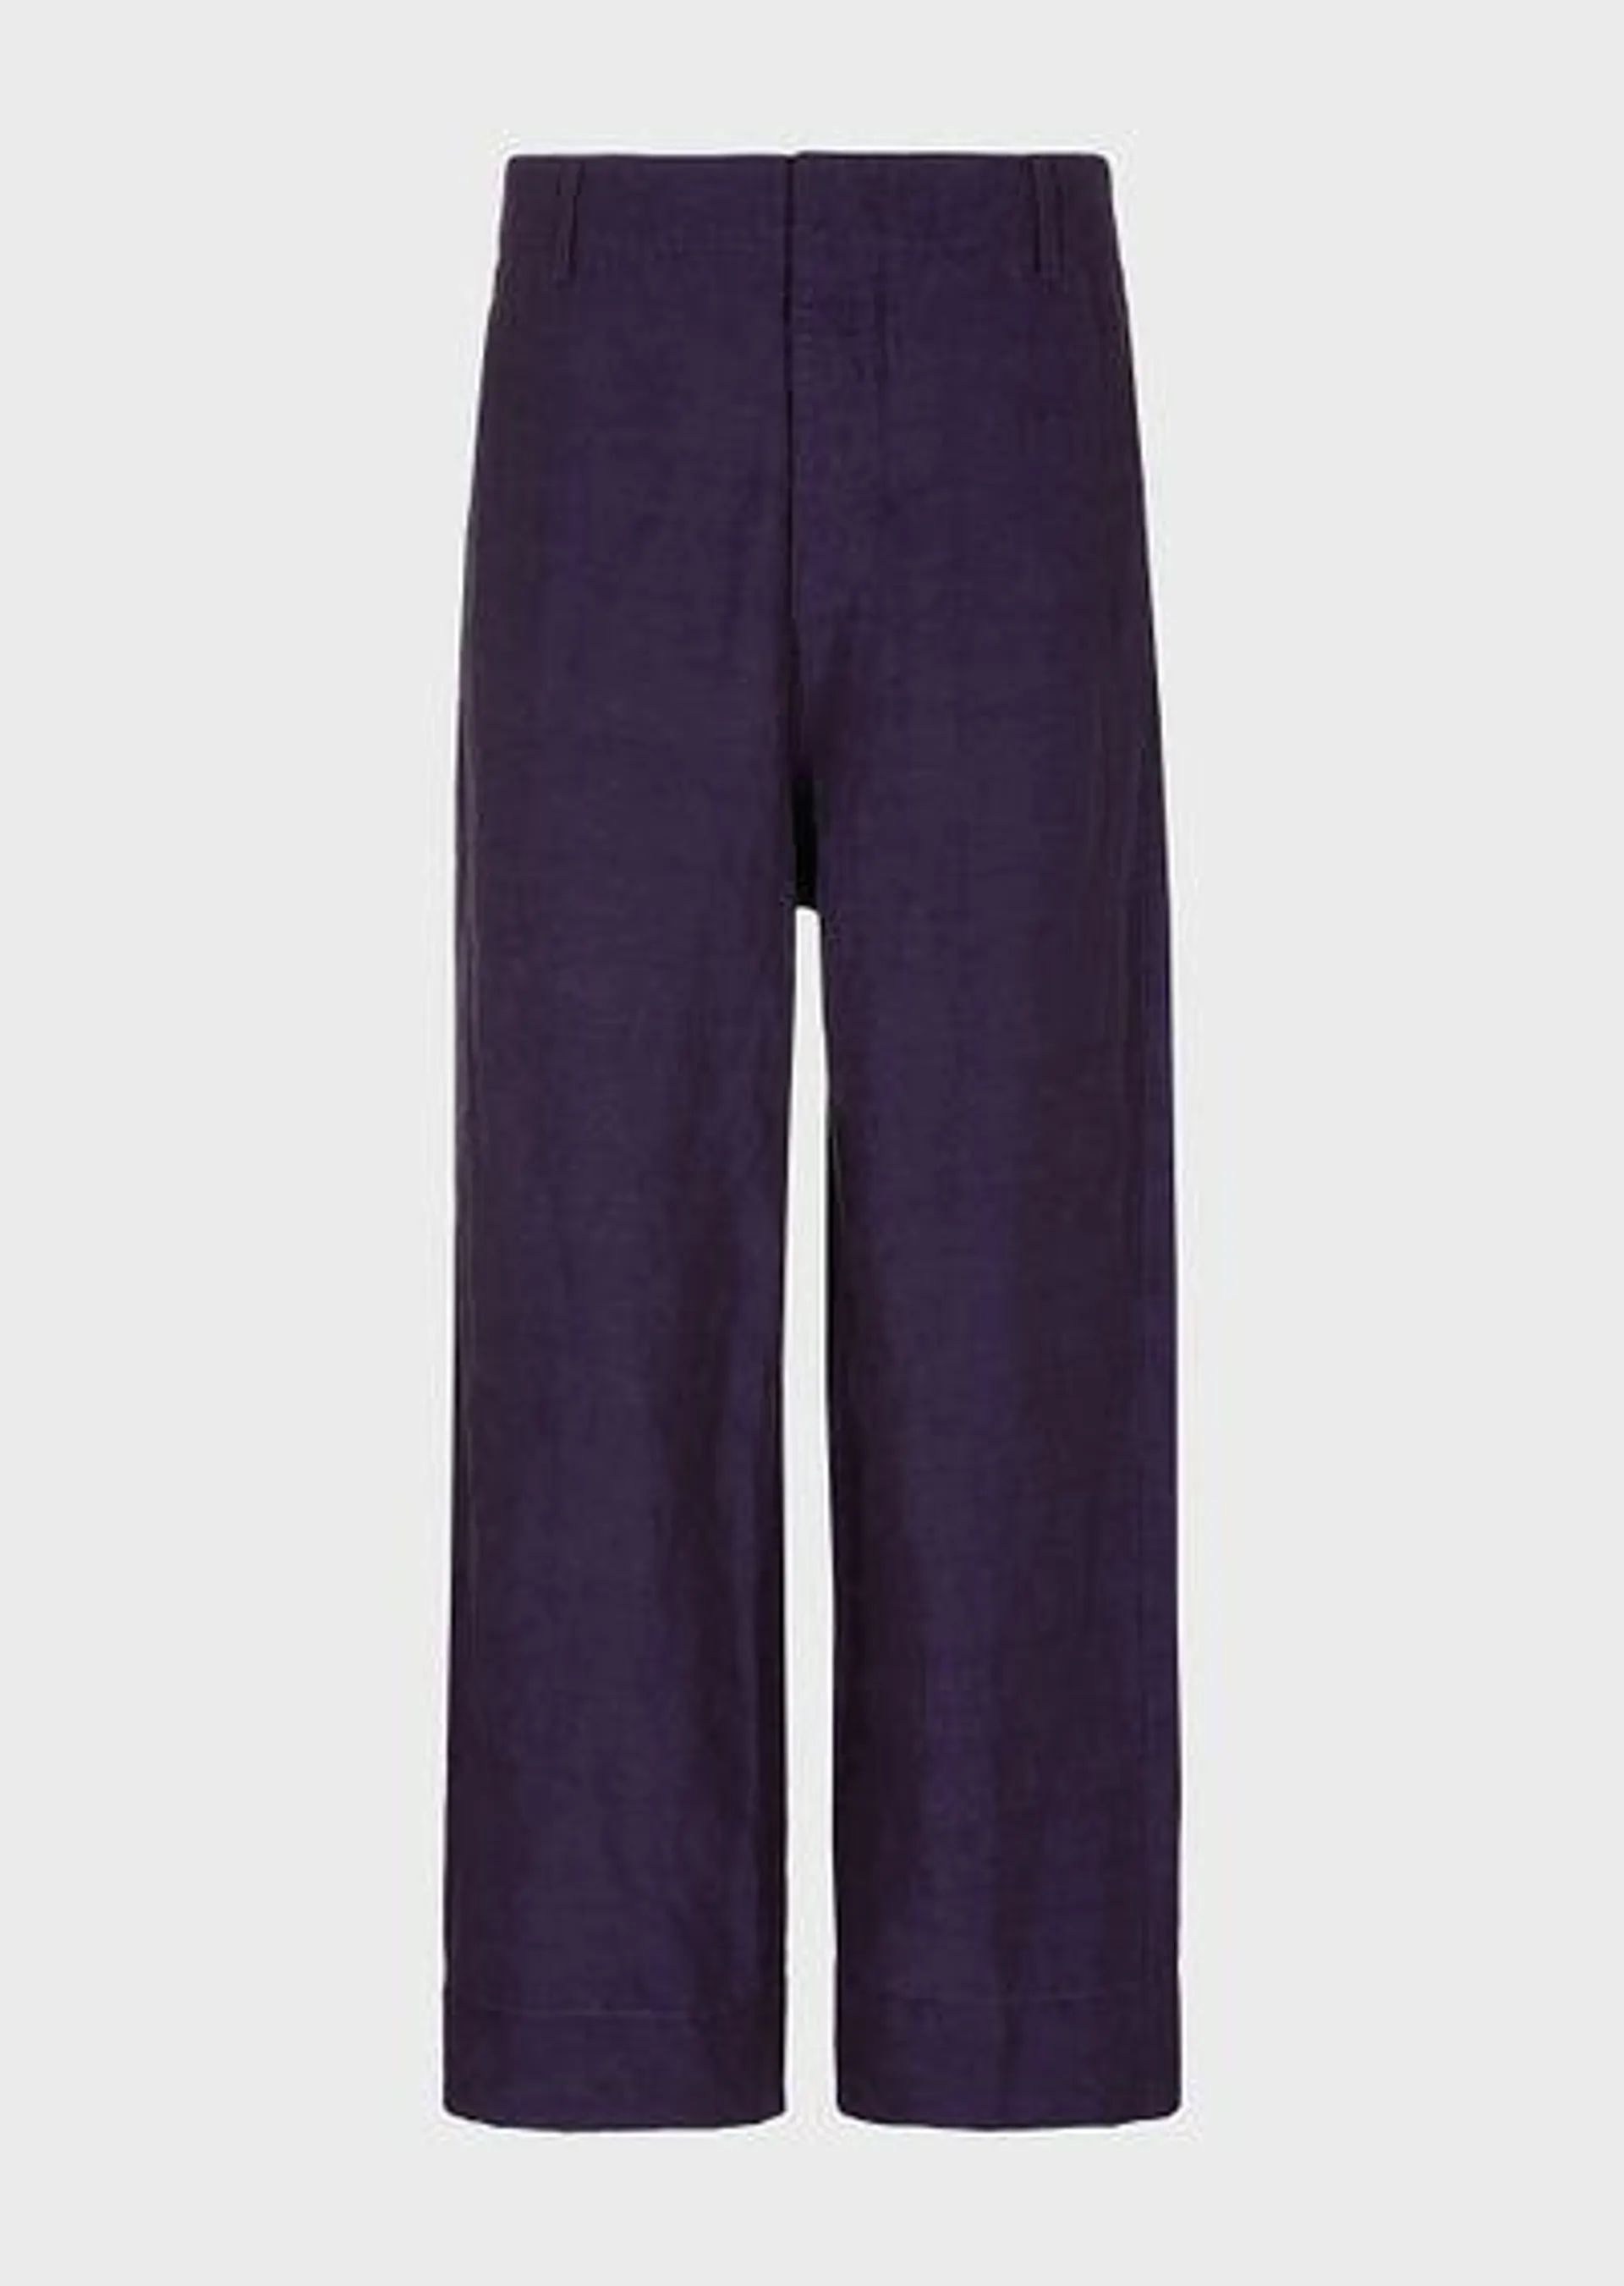 Linen and viscose flat-front trousers